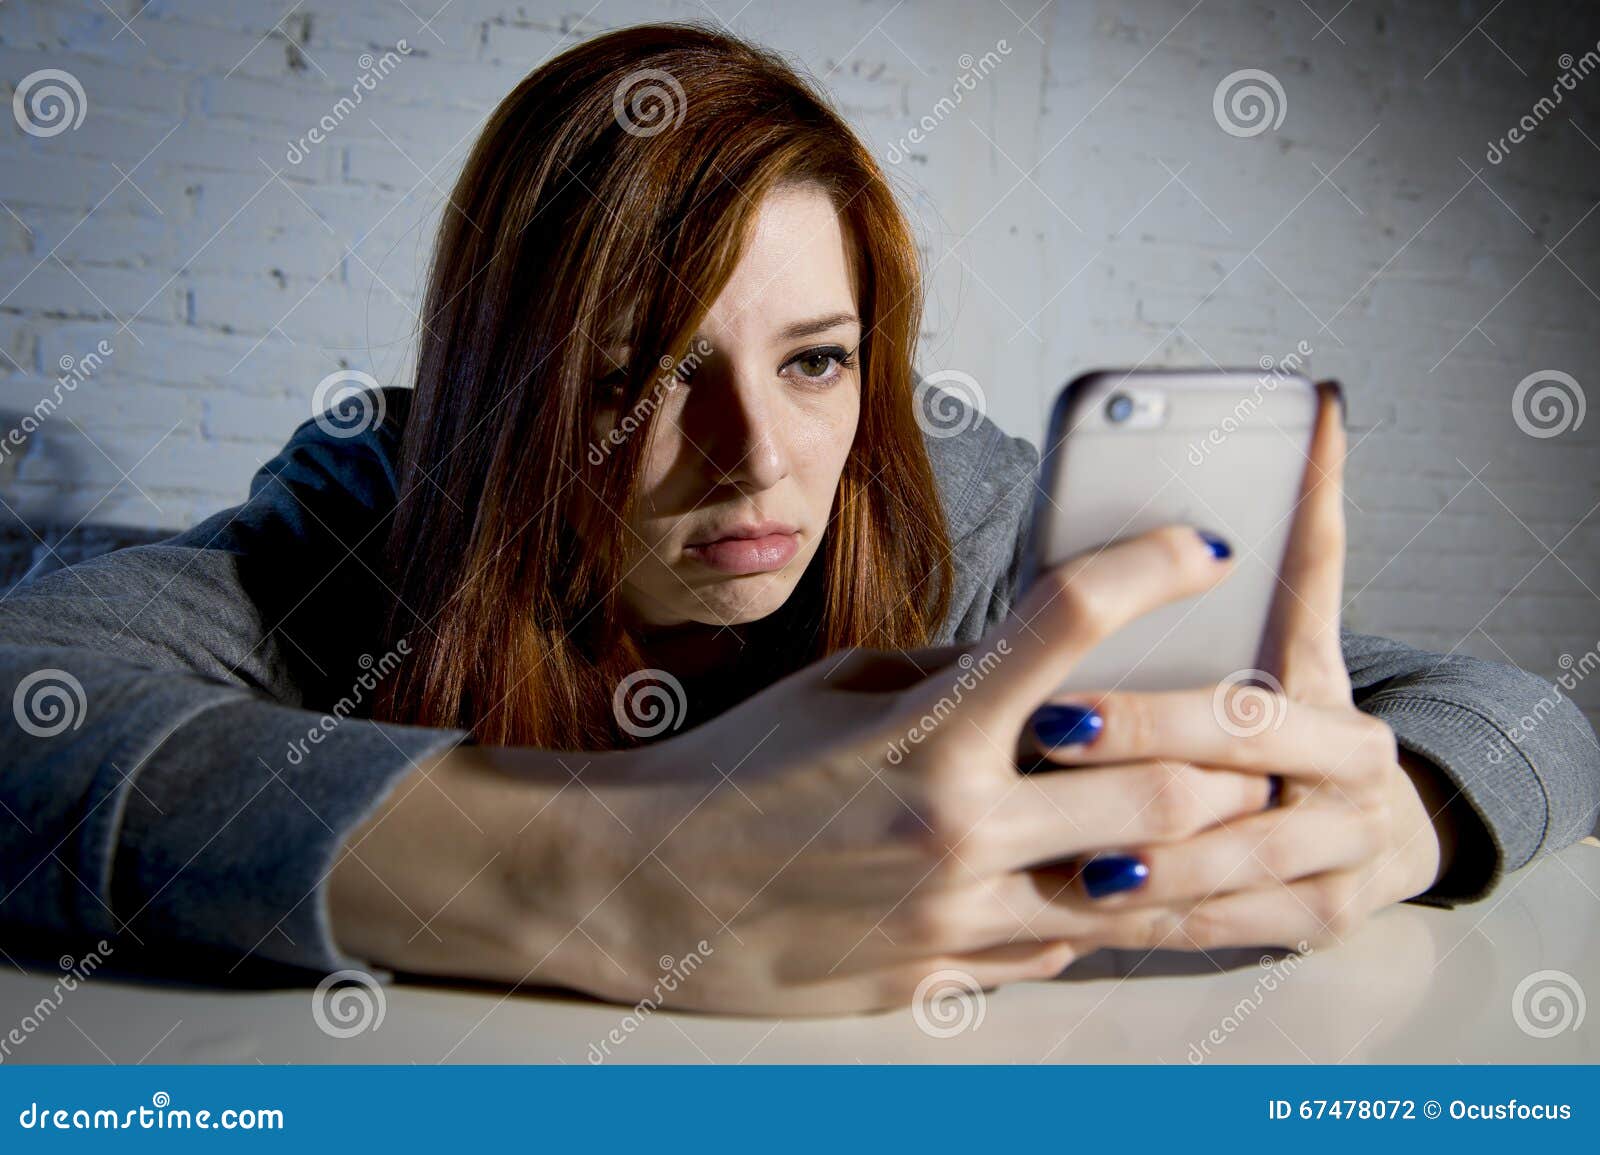 young sad vulnerable girl using mobile phone scared and desperate suffering online abuse cyberbullying